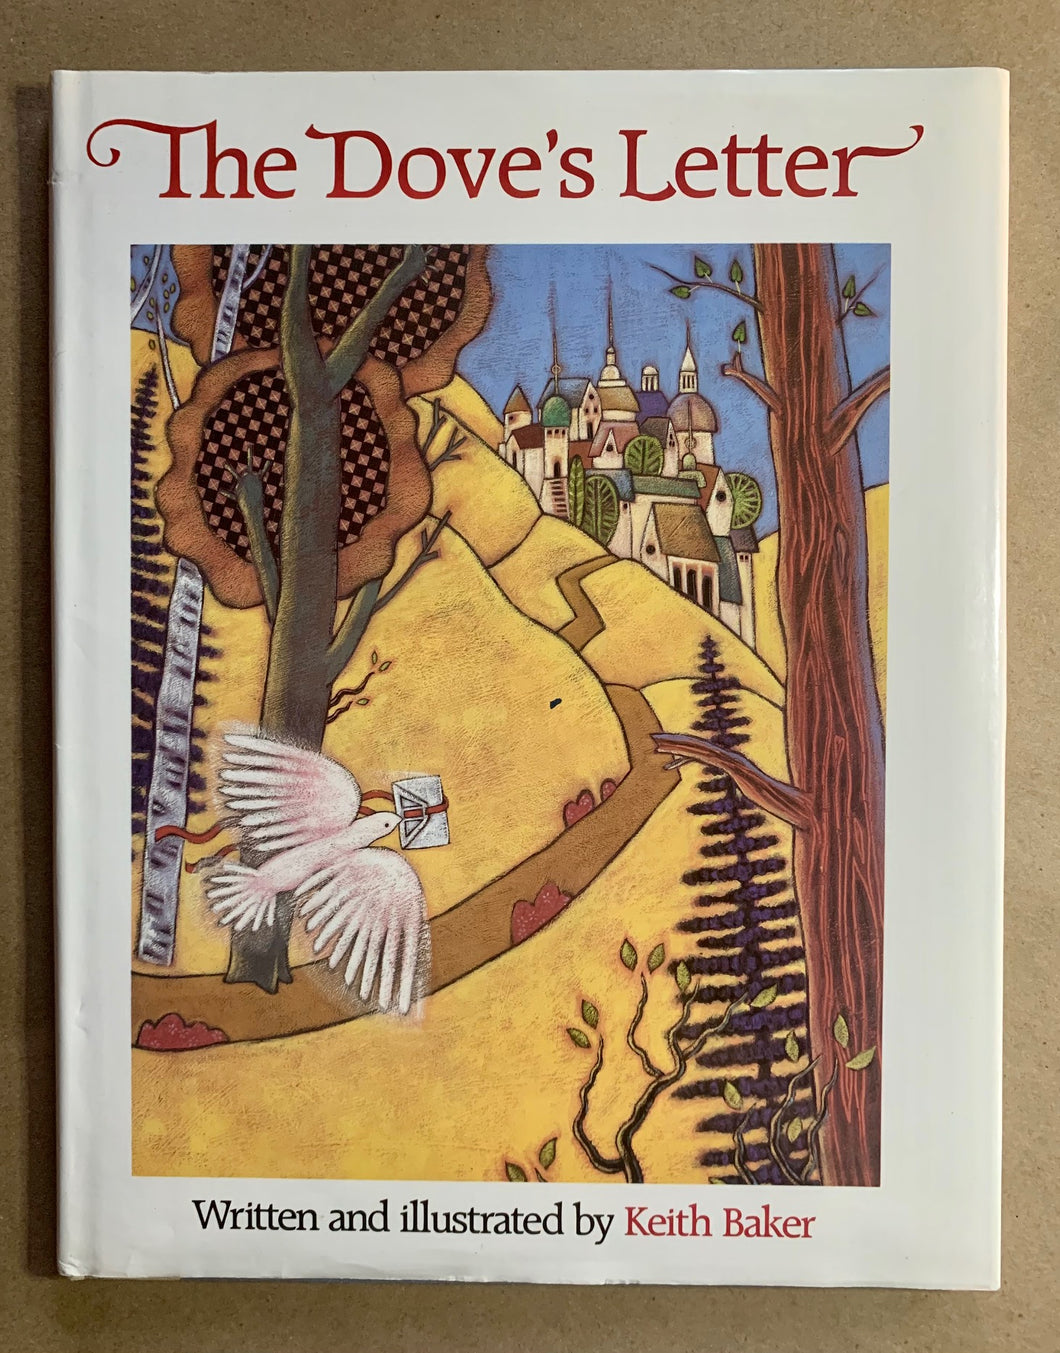 The Dove's Letter by Keith Baker 1st Edition Childrens Picture Book Hardcover